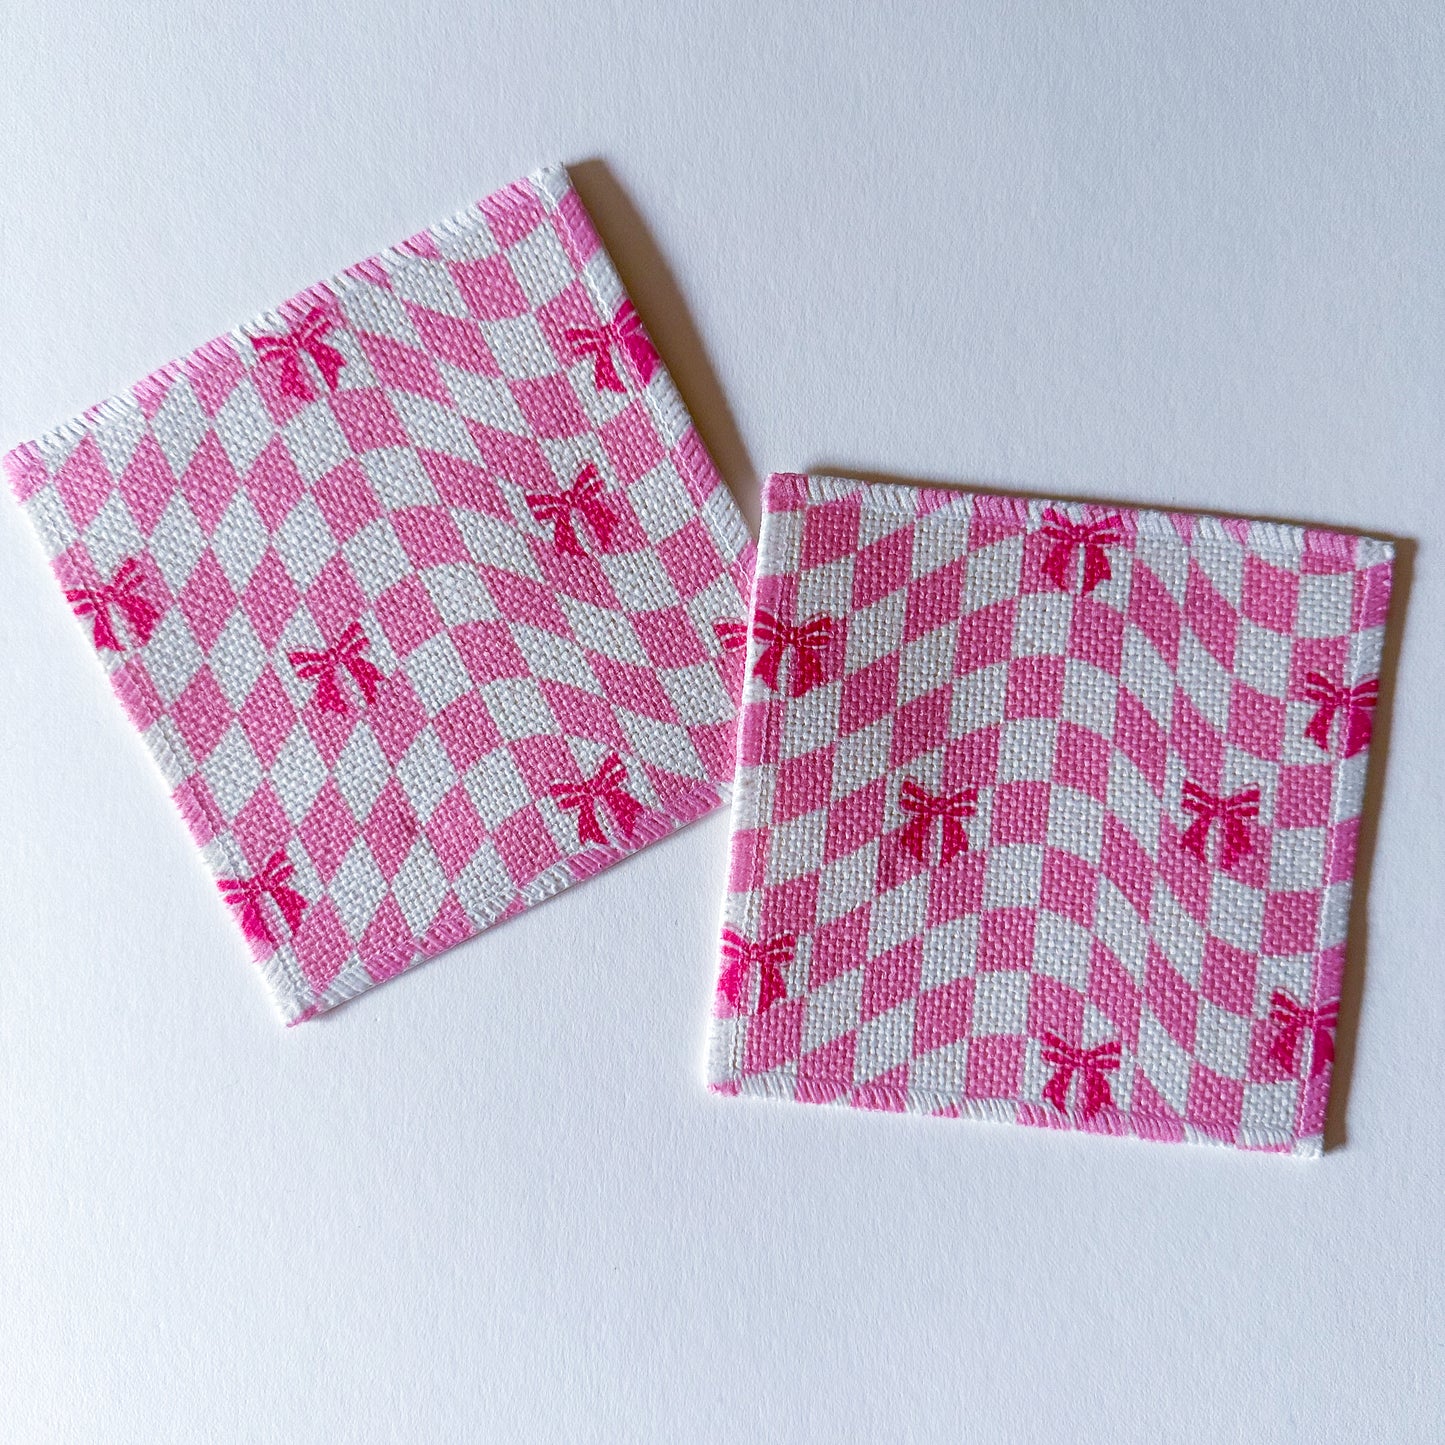 pink checkerboard coaster for drinks